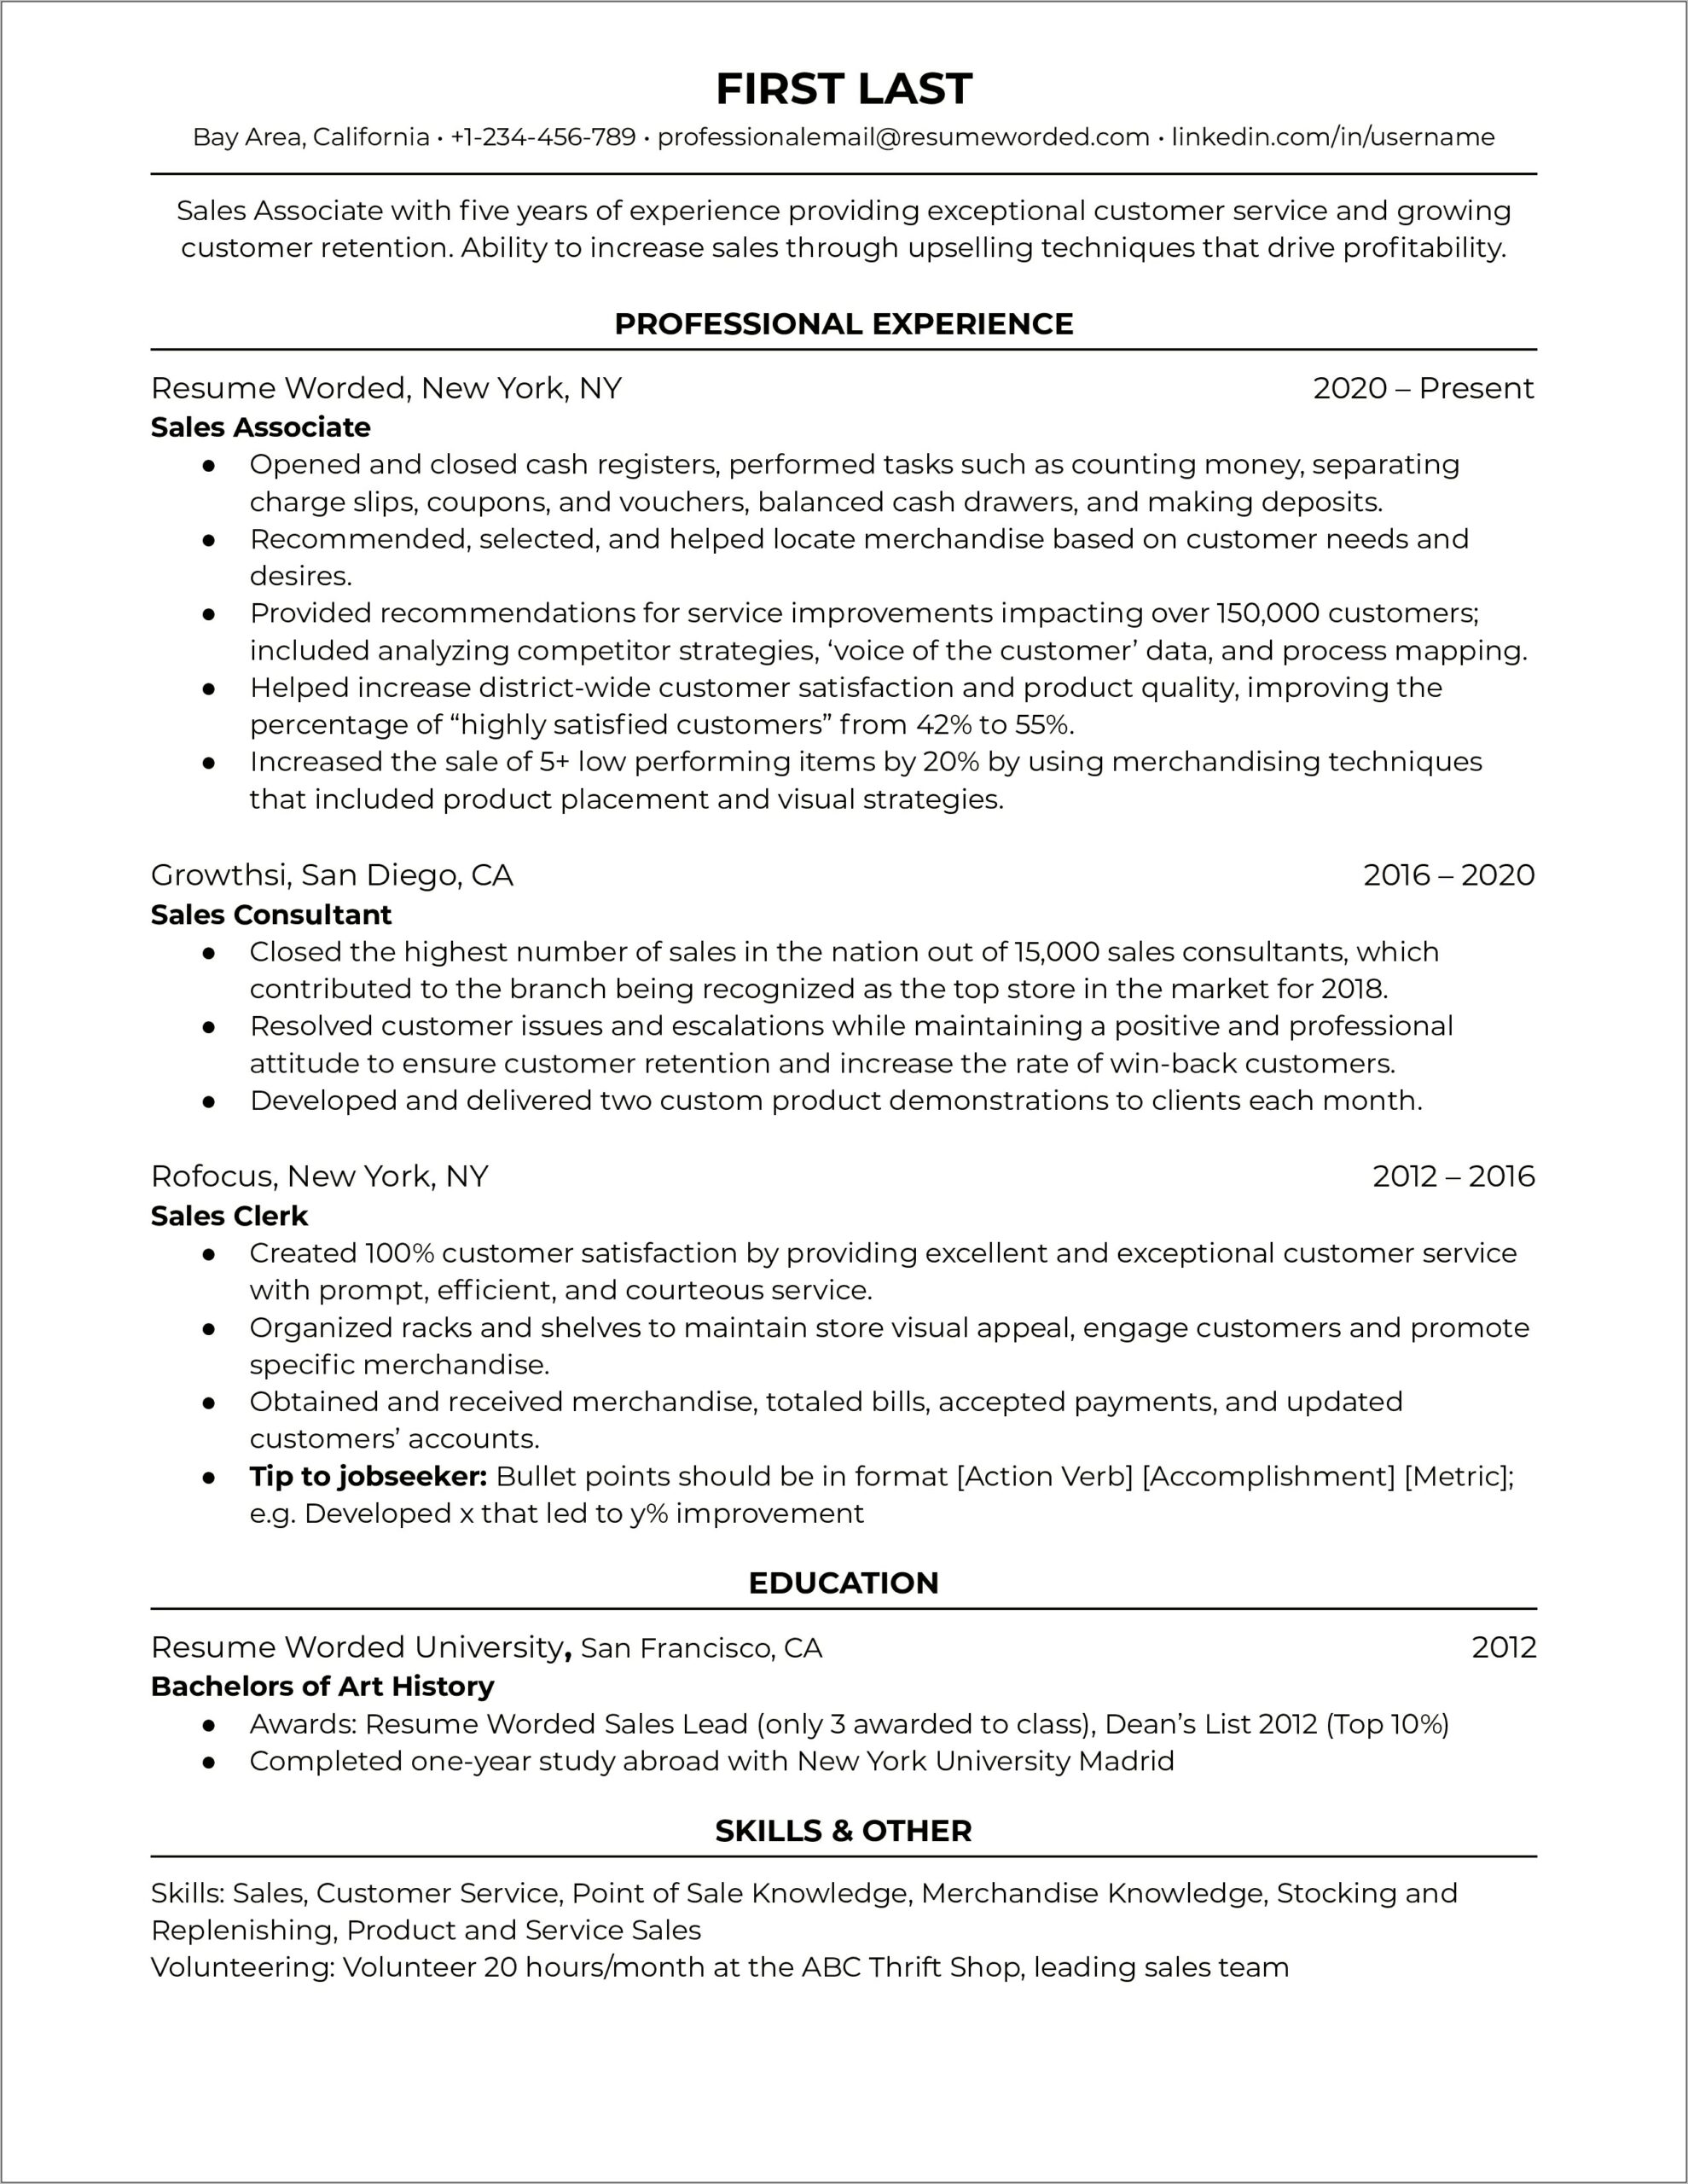 Resume Examples With Bullet Points